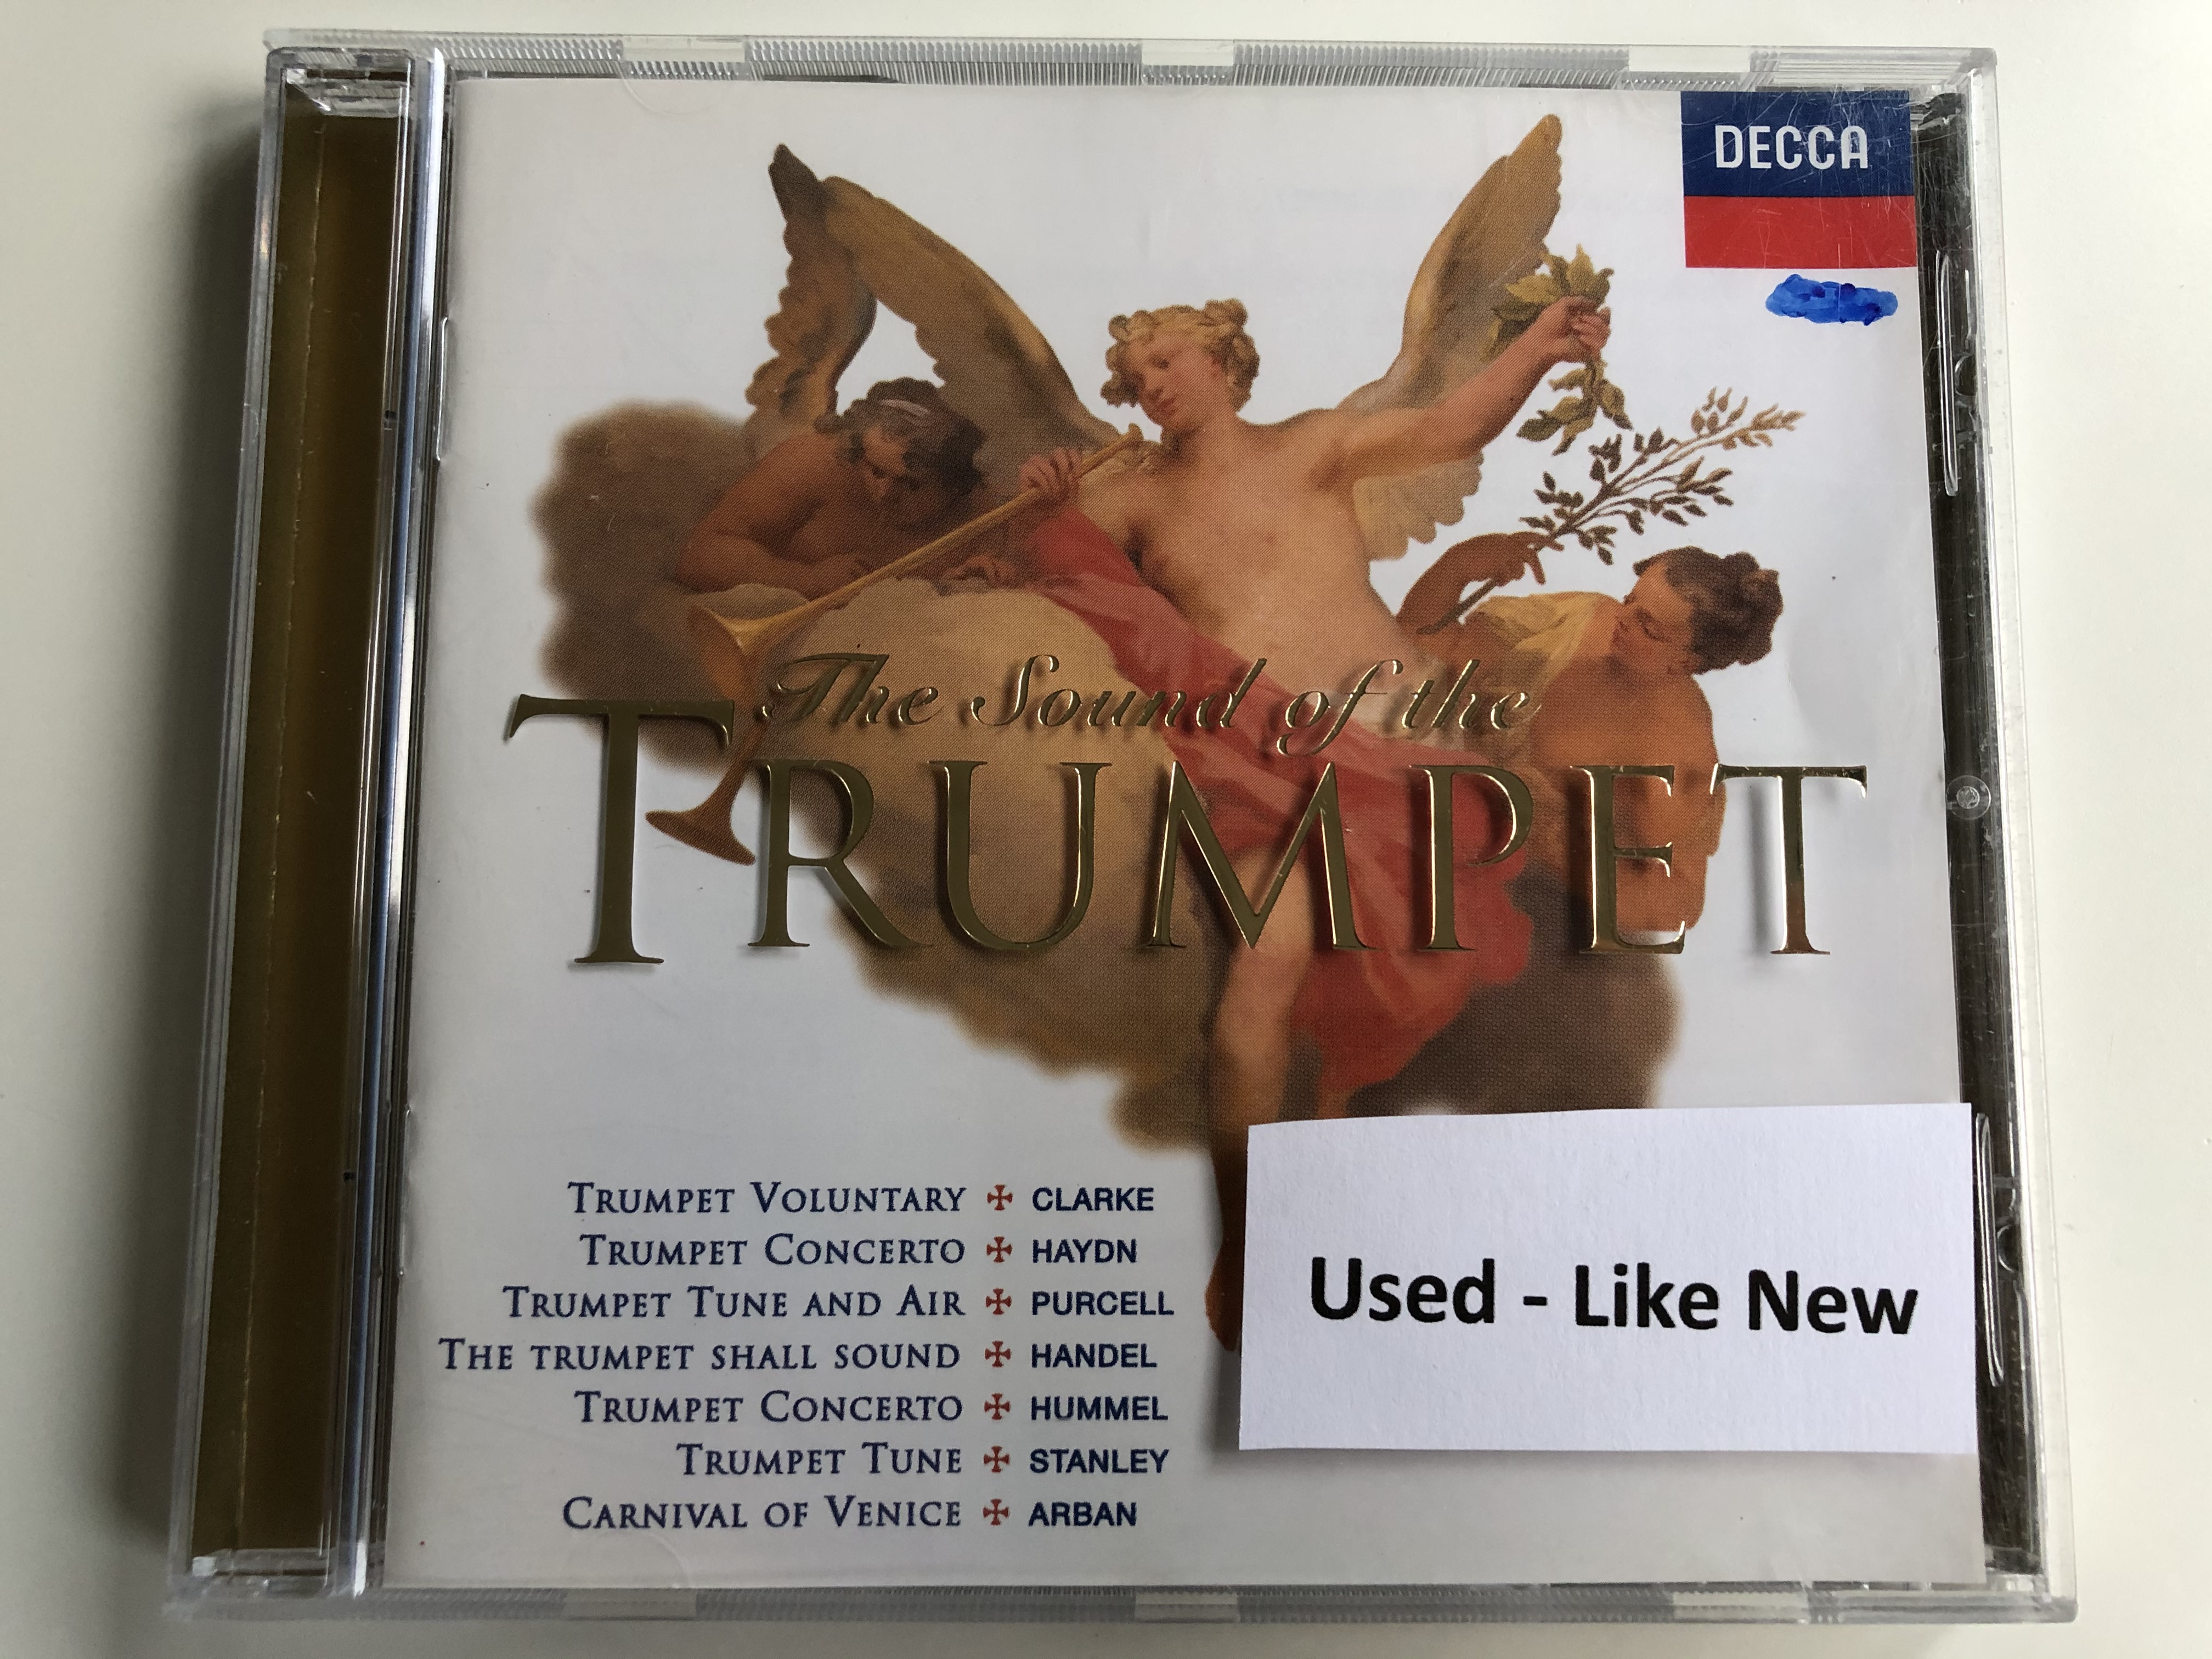 the-sound-of-the-trupmet-clarke-trumpet-voluntary-haydn-trumpet-concerto-purcell-trumpet-tune-and-air-handel-the-trumpet-shall-sound-hummel-trumpet-concerto-stanley-trumpet-tune-1-.jpg